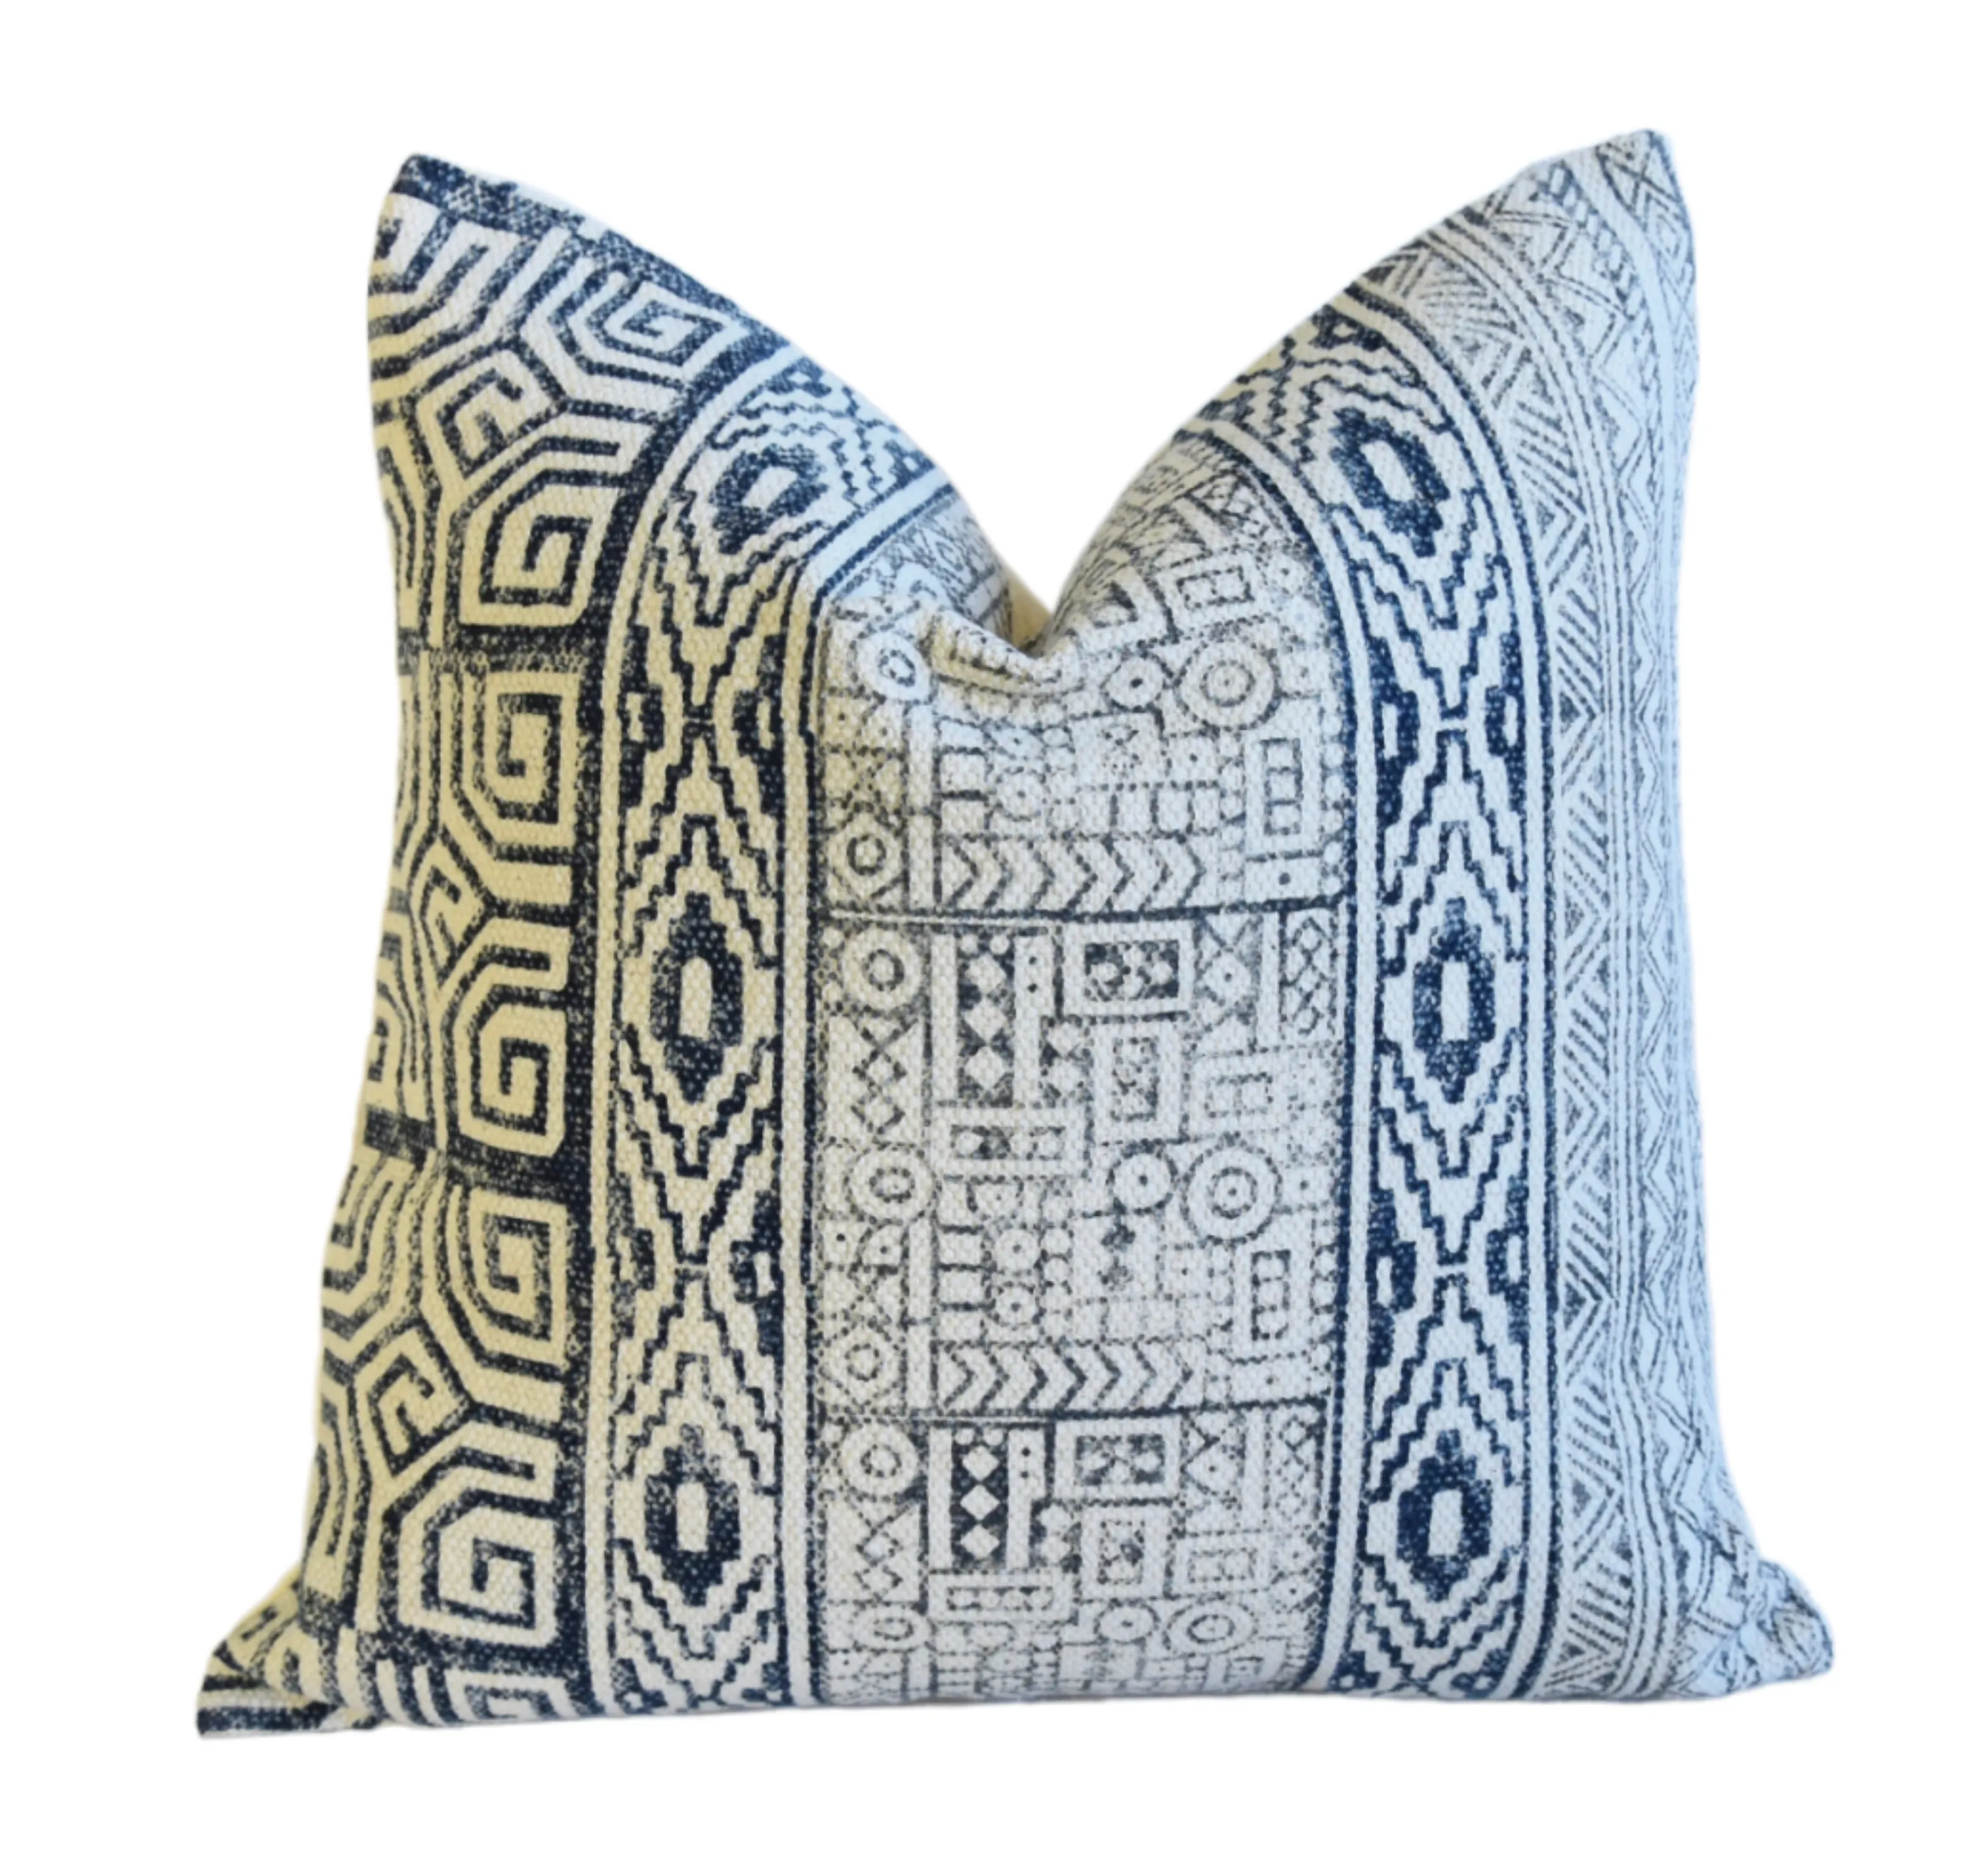 Hand-Printed Blue & White Cotton Pillow